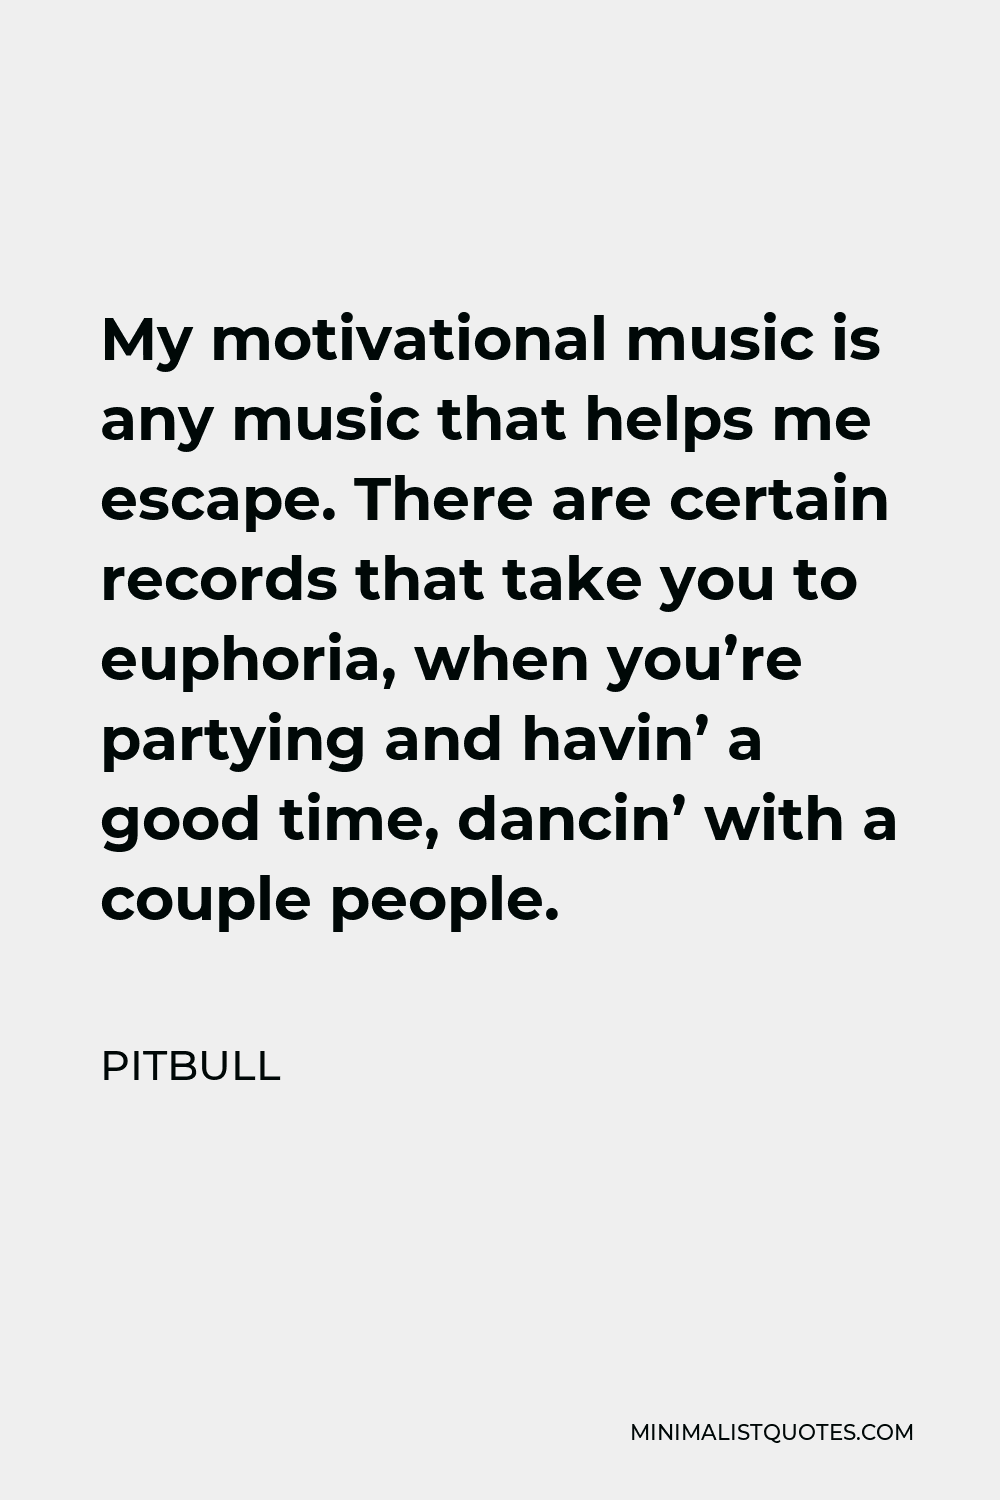 Pitbull Quote - My motivational music is any music that helps me escape. There are certain records that take you to euphoria, when you’re partying and havin’ a good time, dancin’ with a couple people.